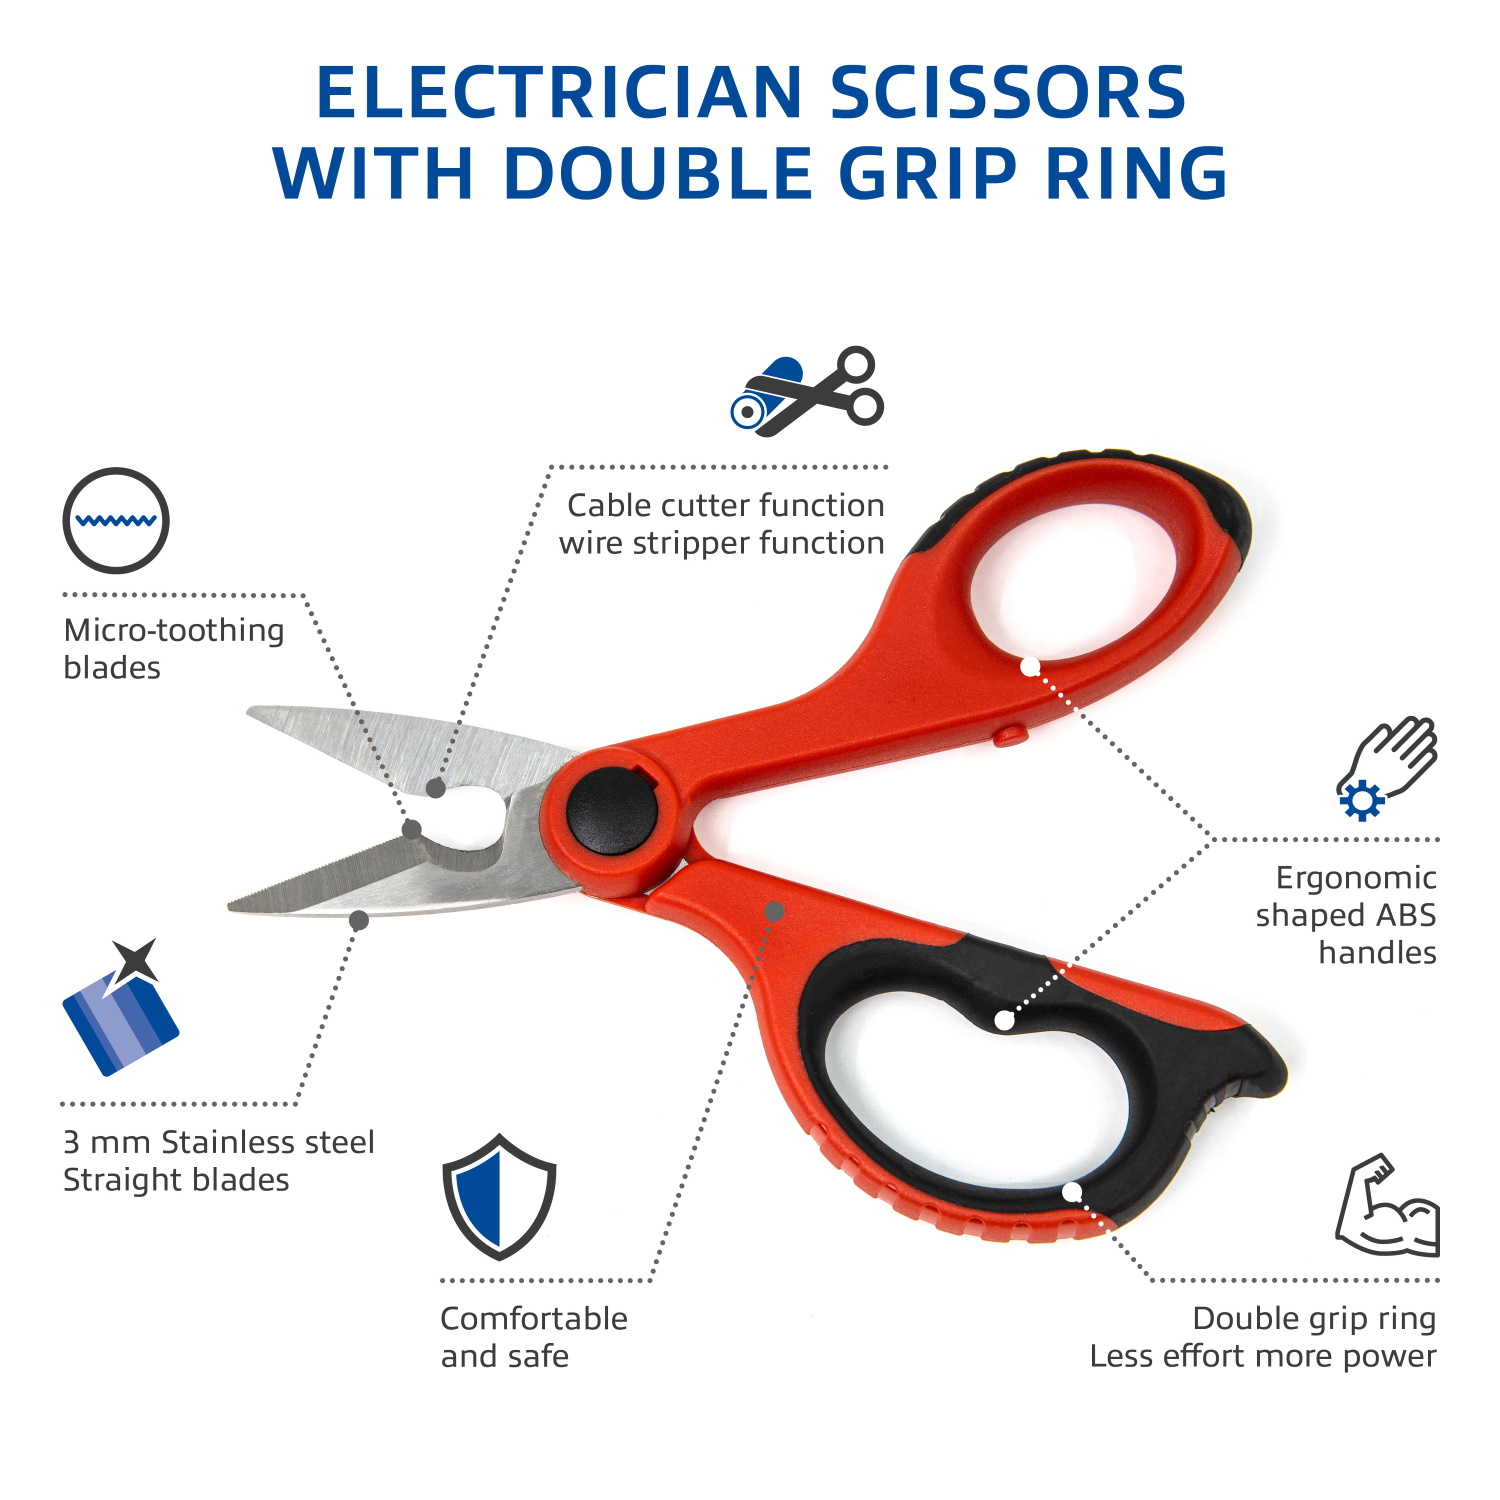 Electrician Scissors with straight blades and double grip